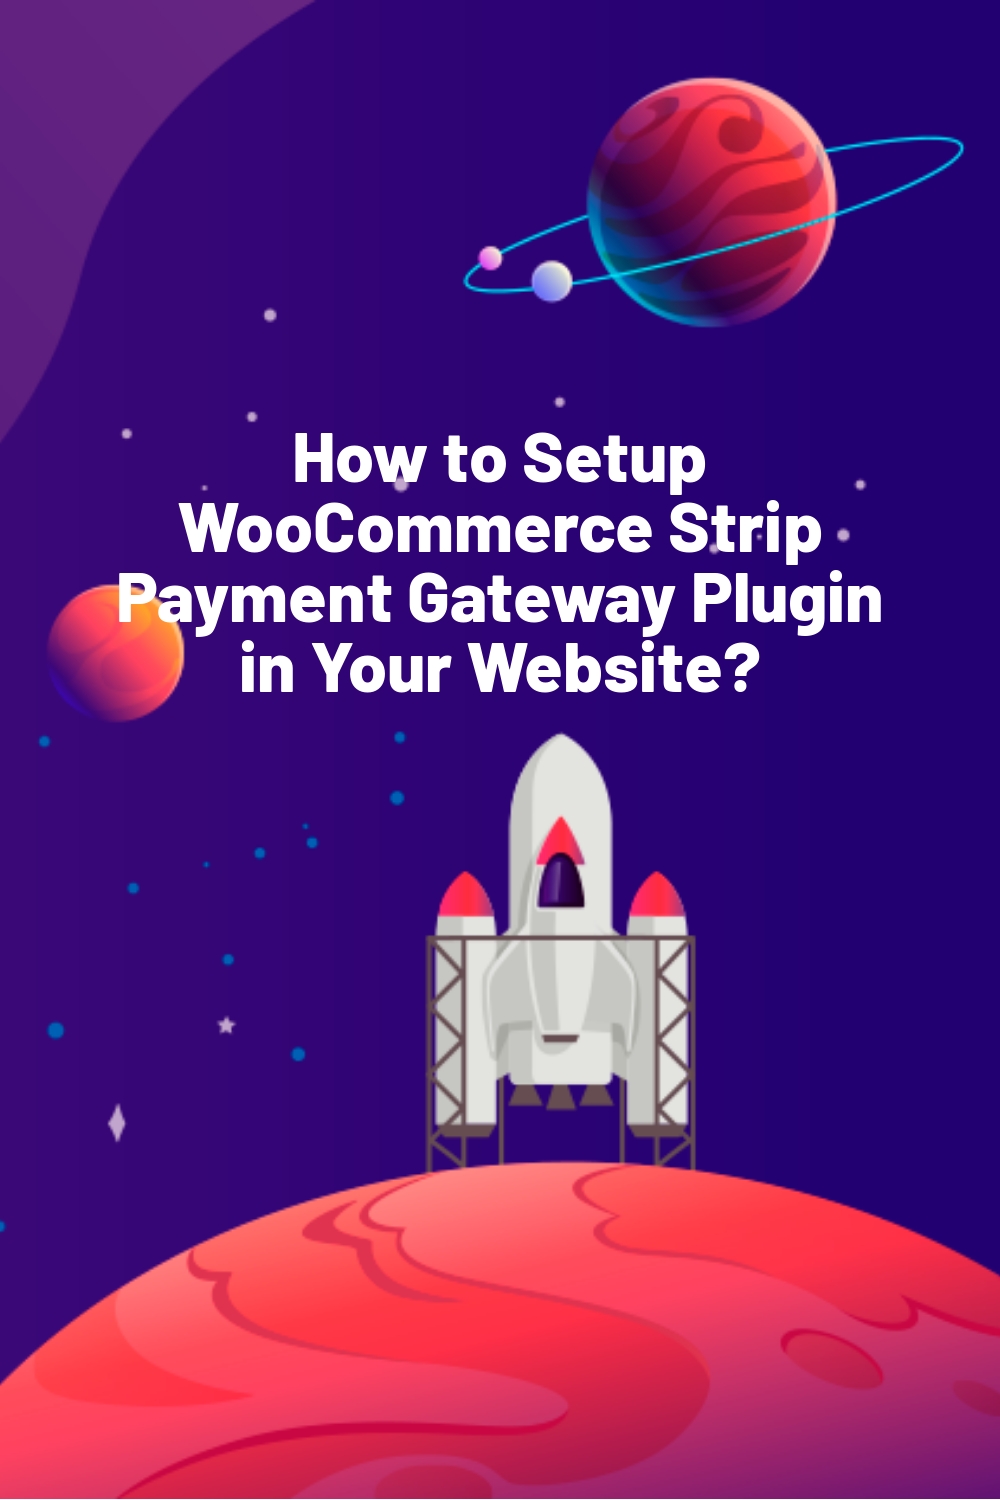 How to Setup WooCommerce Strip Payment Gateway Plugin in Your Website?